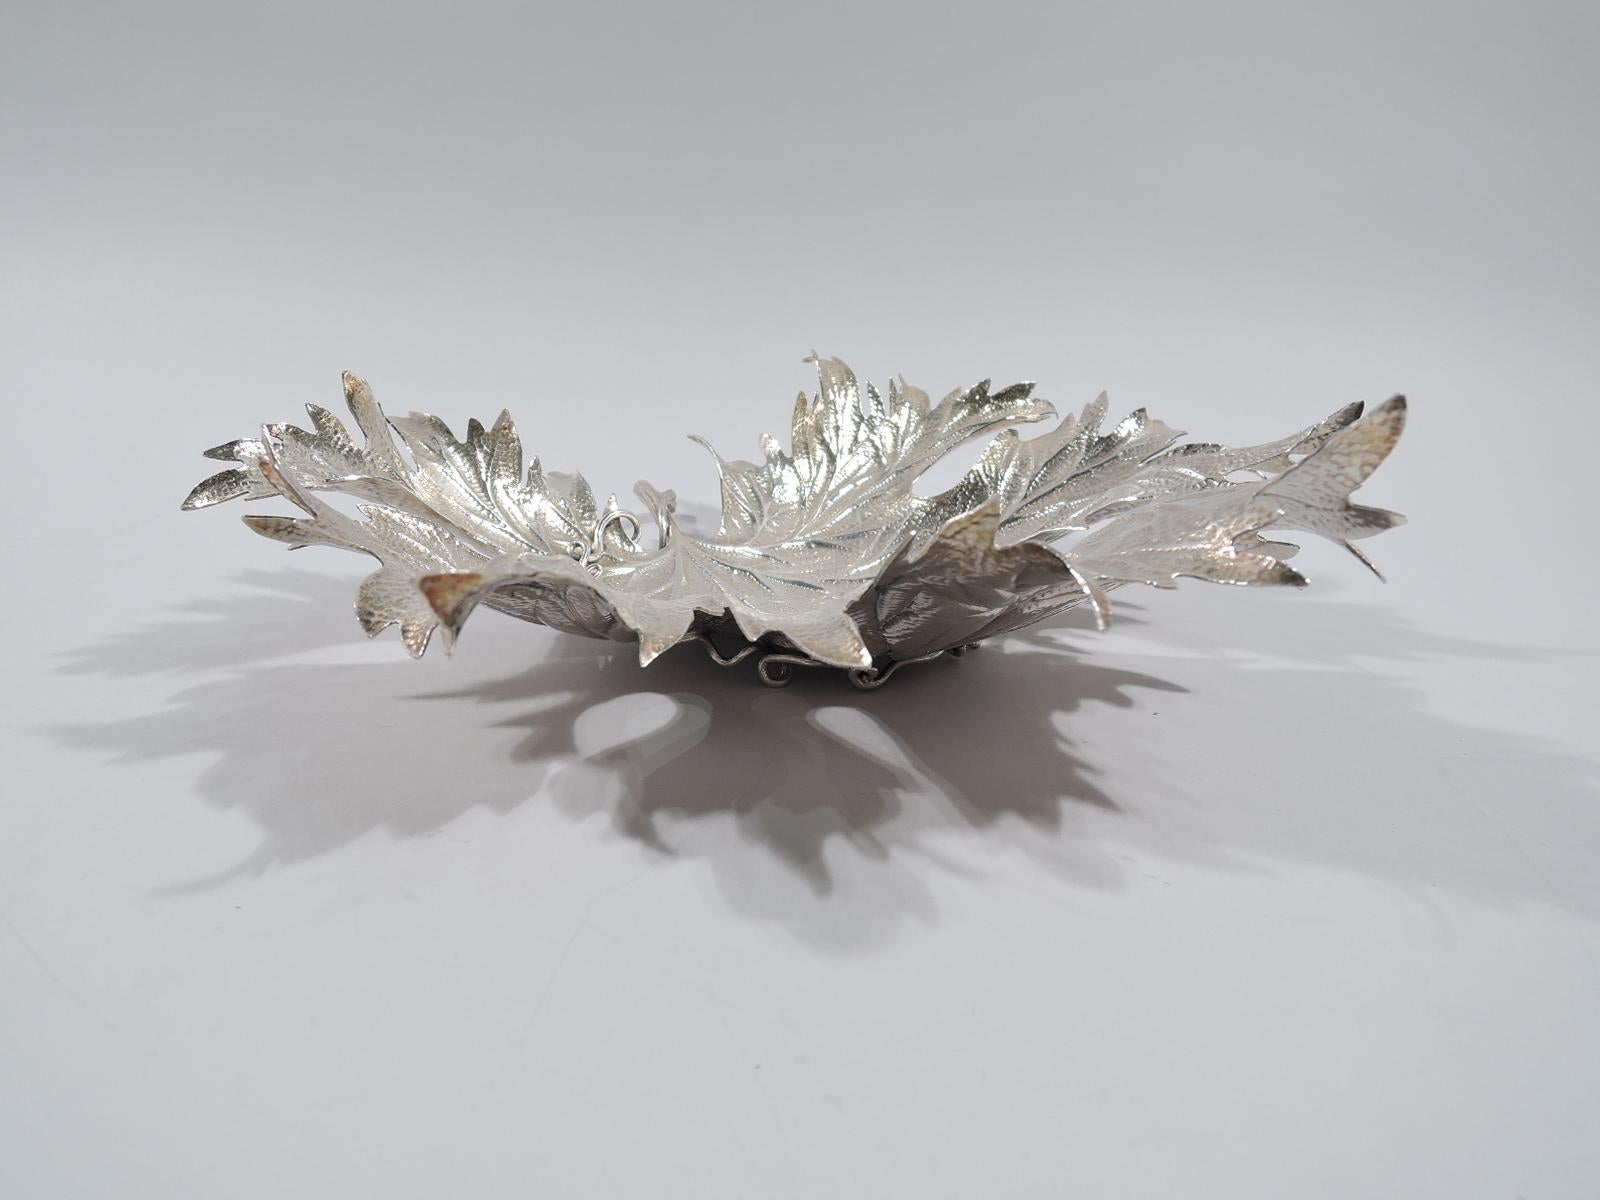 Large sterling silver figural dish. Realistic maple leaf with stippled irregularities, chased veins, curling and serrated tips, tendril-entwined wood stem, and tendril support. Marked “Buccellati Italy Sterling”, post-1967 Italian mark for Pradella